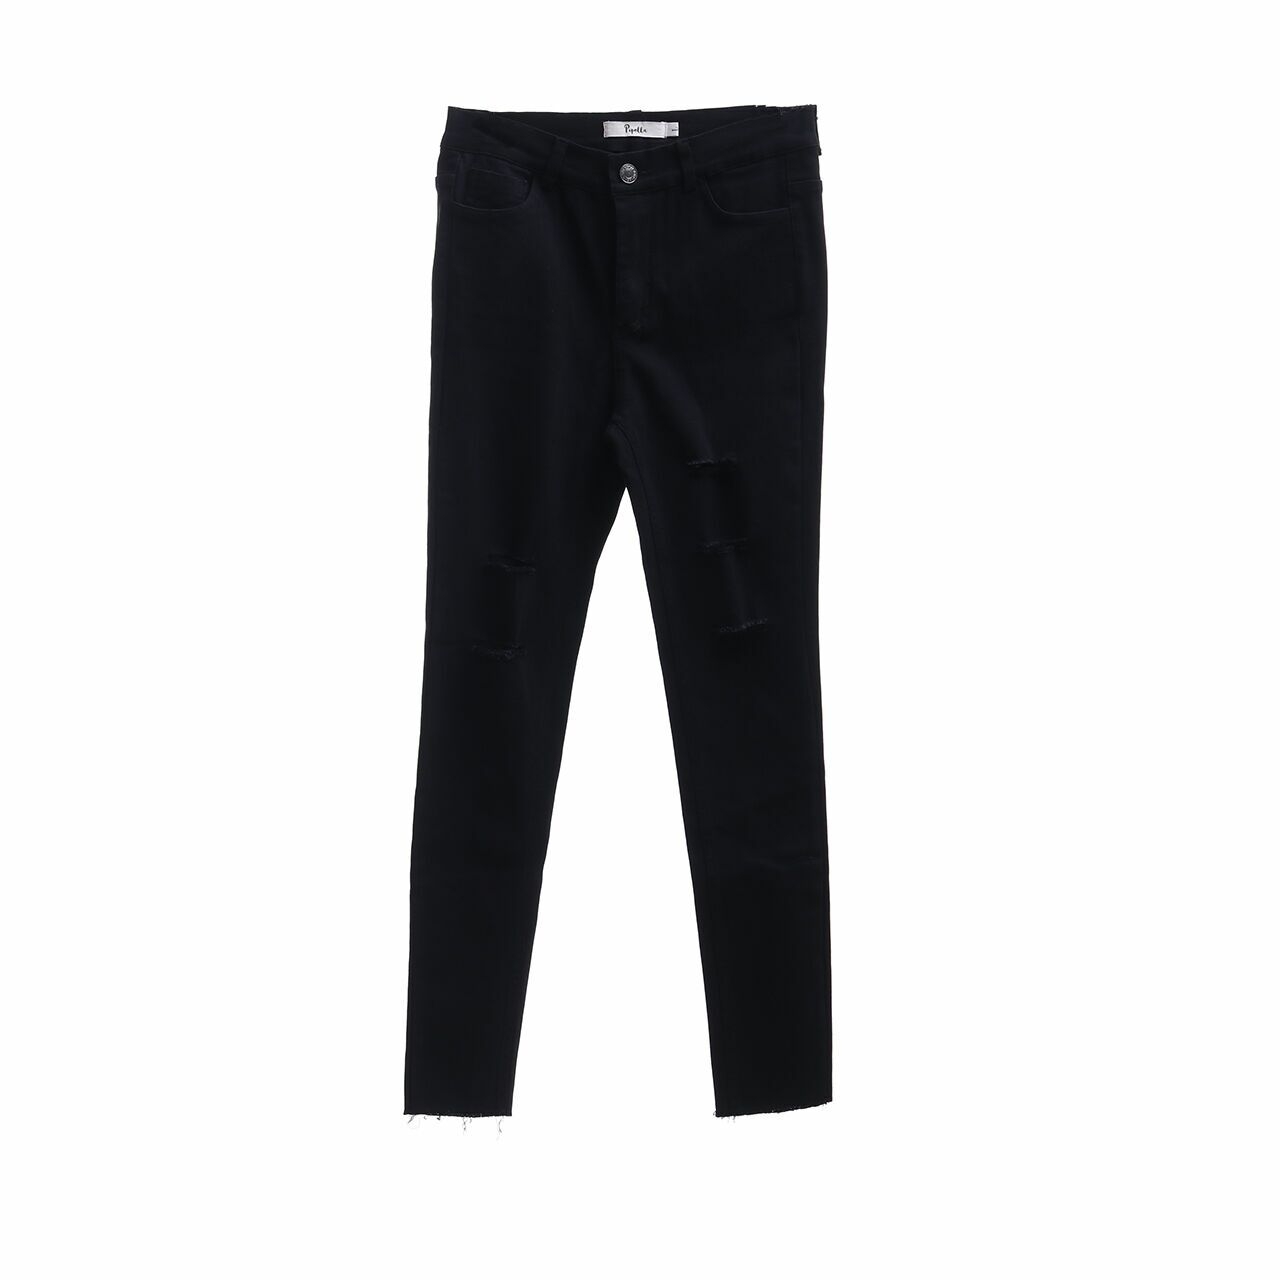 Pipolla Black Ripped Pants